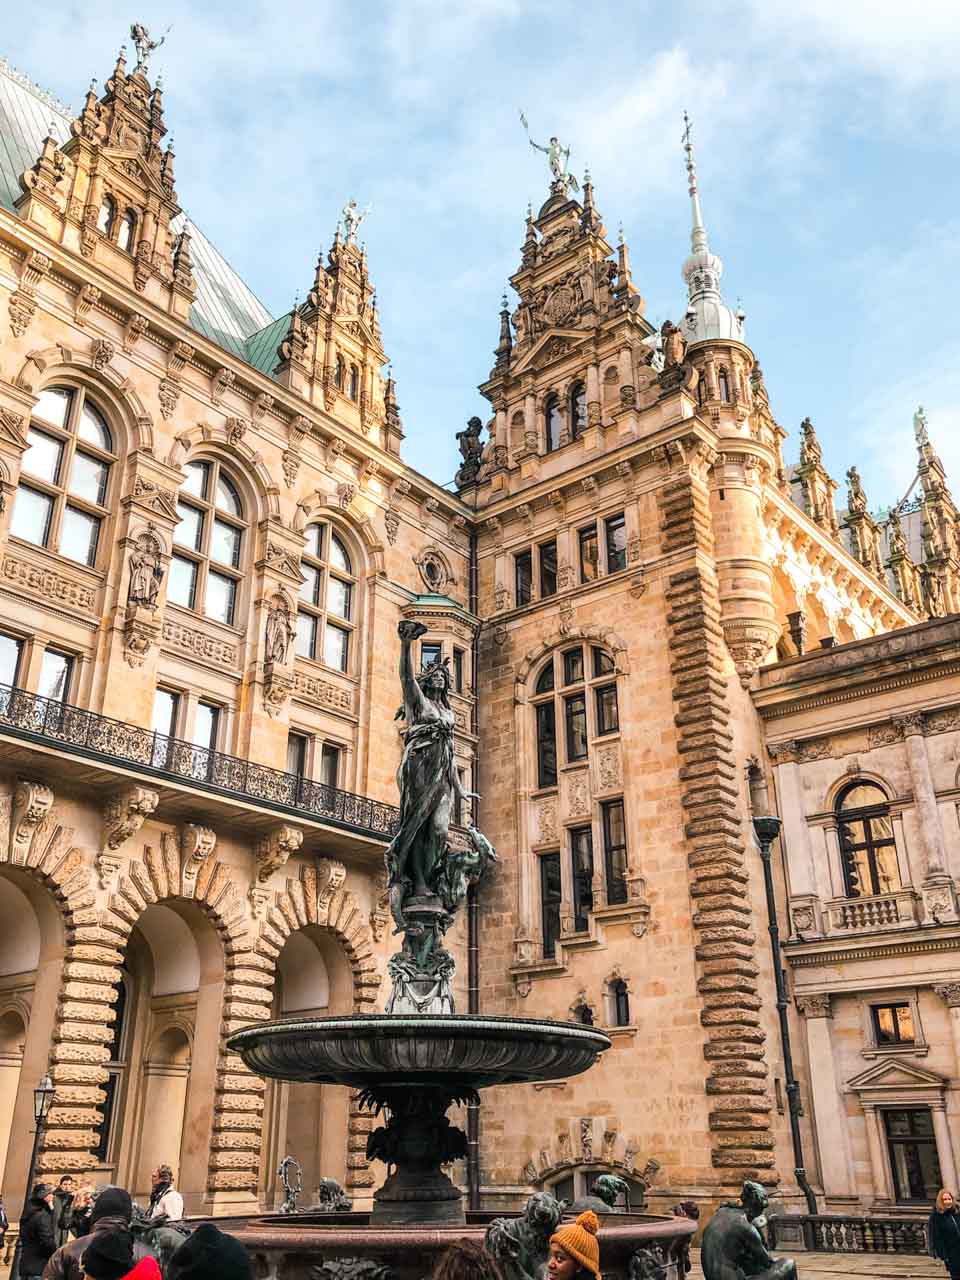 The fountain in the inner courtyard of the City Hall in Hamburg